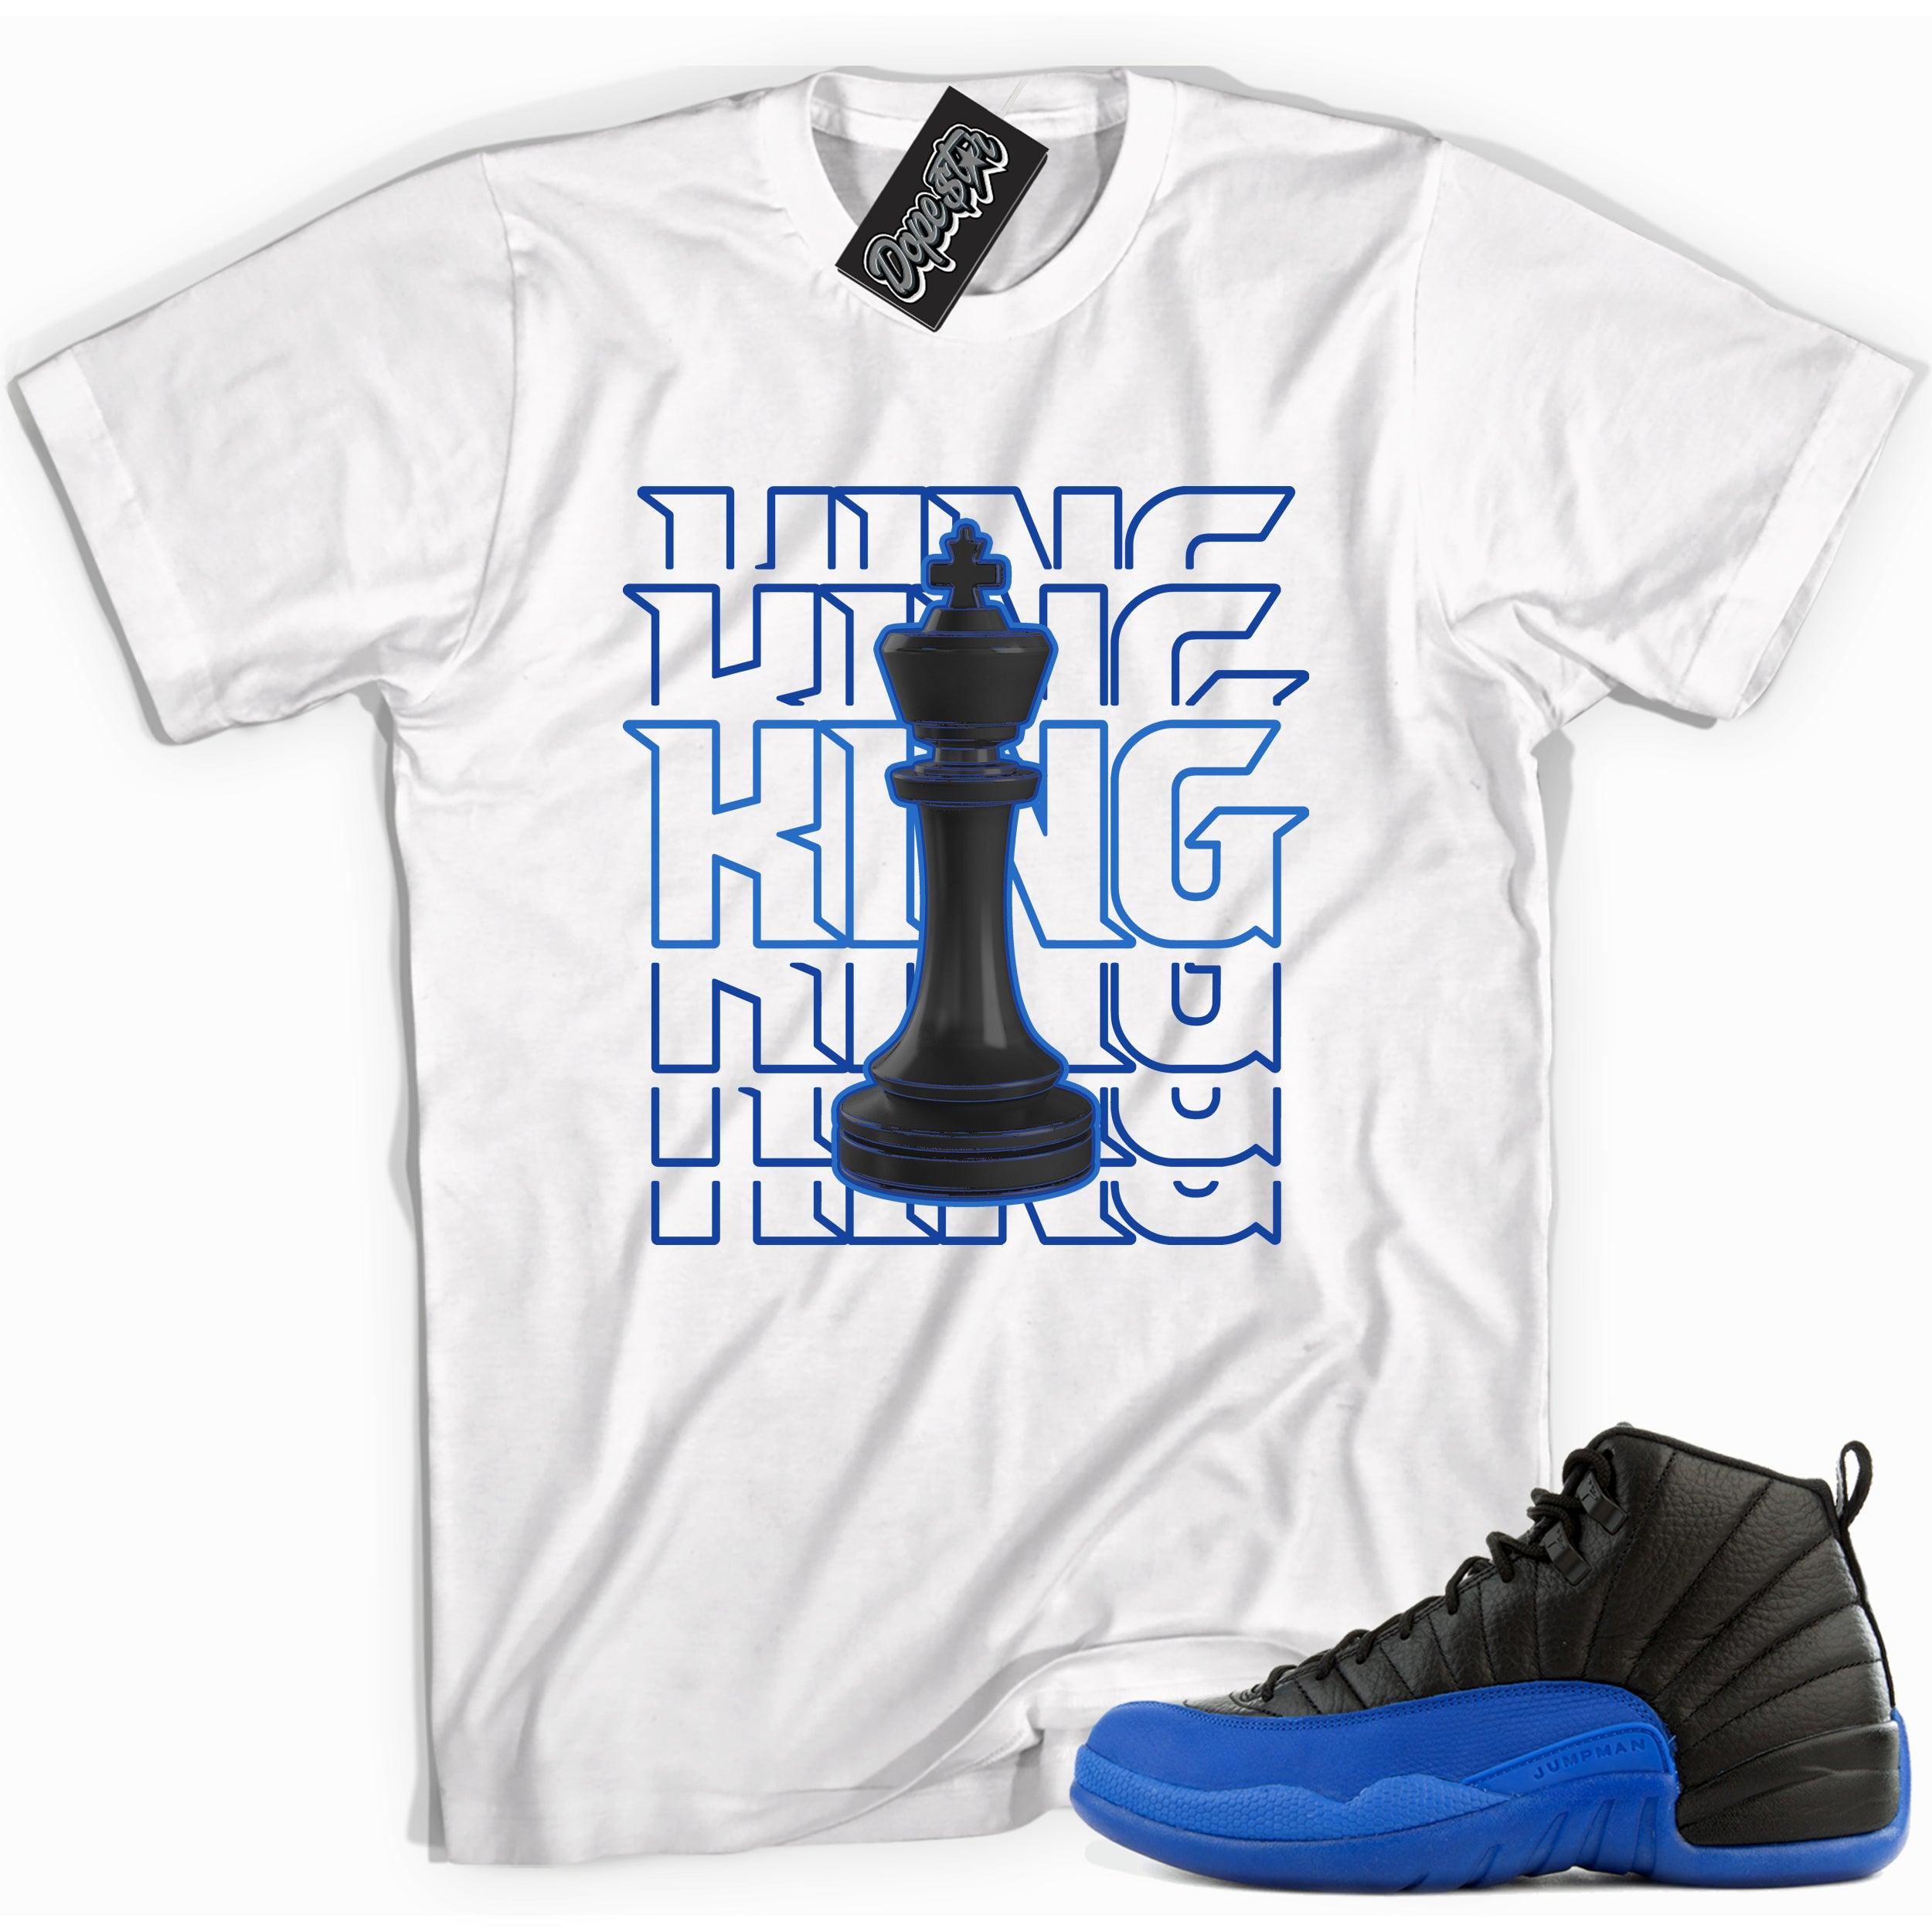 Cool white graphic tee with 'king' print, that perfectly matches Air Jordan 12 Retro Black Game Royal sneakers.